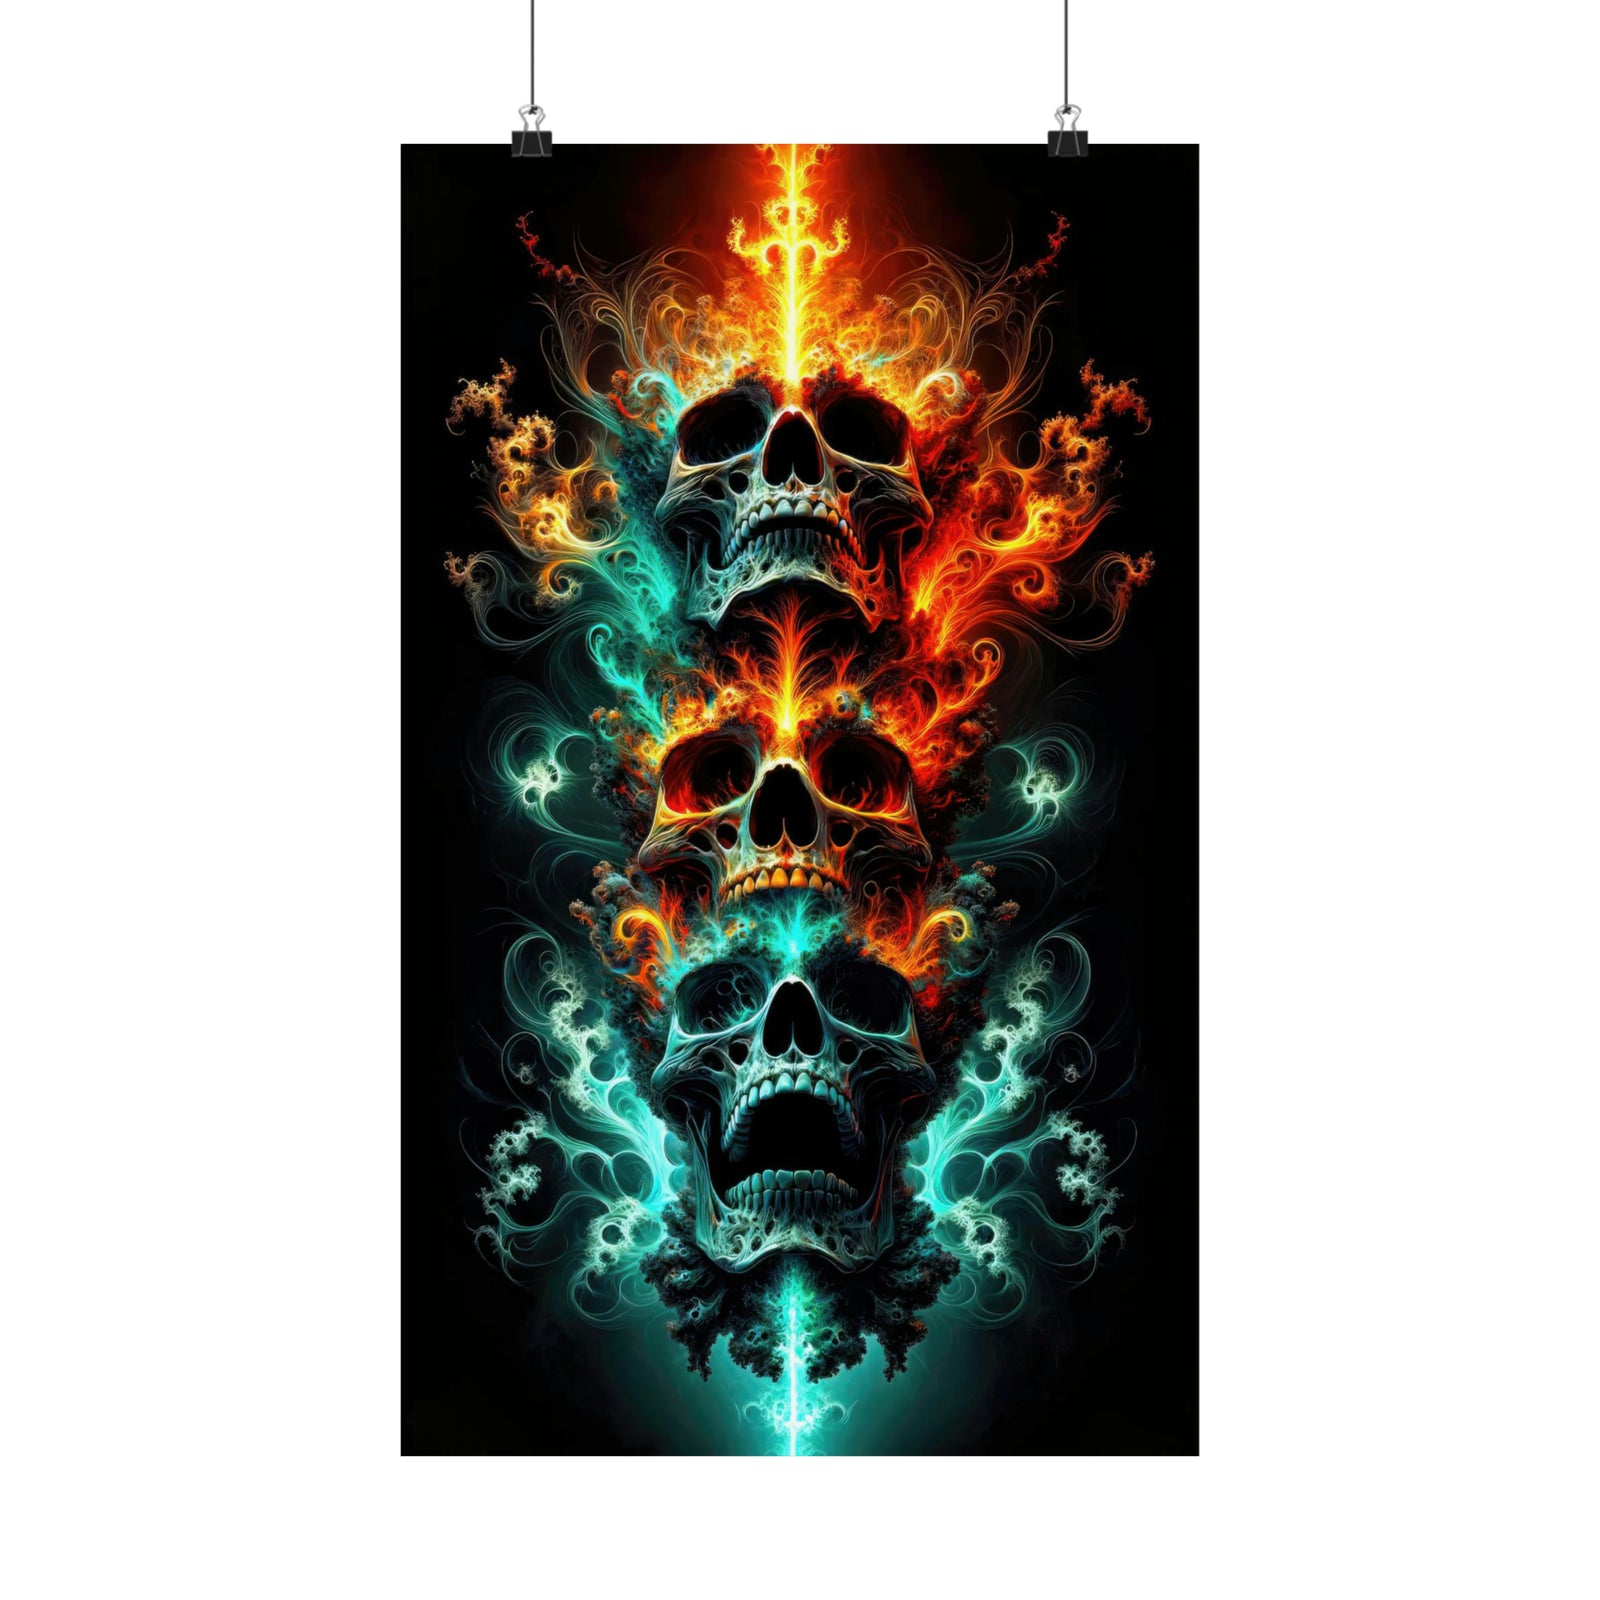 Triptych of the Ethereal Guardians Poster